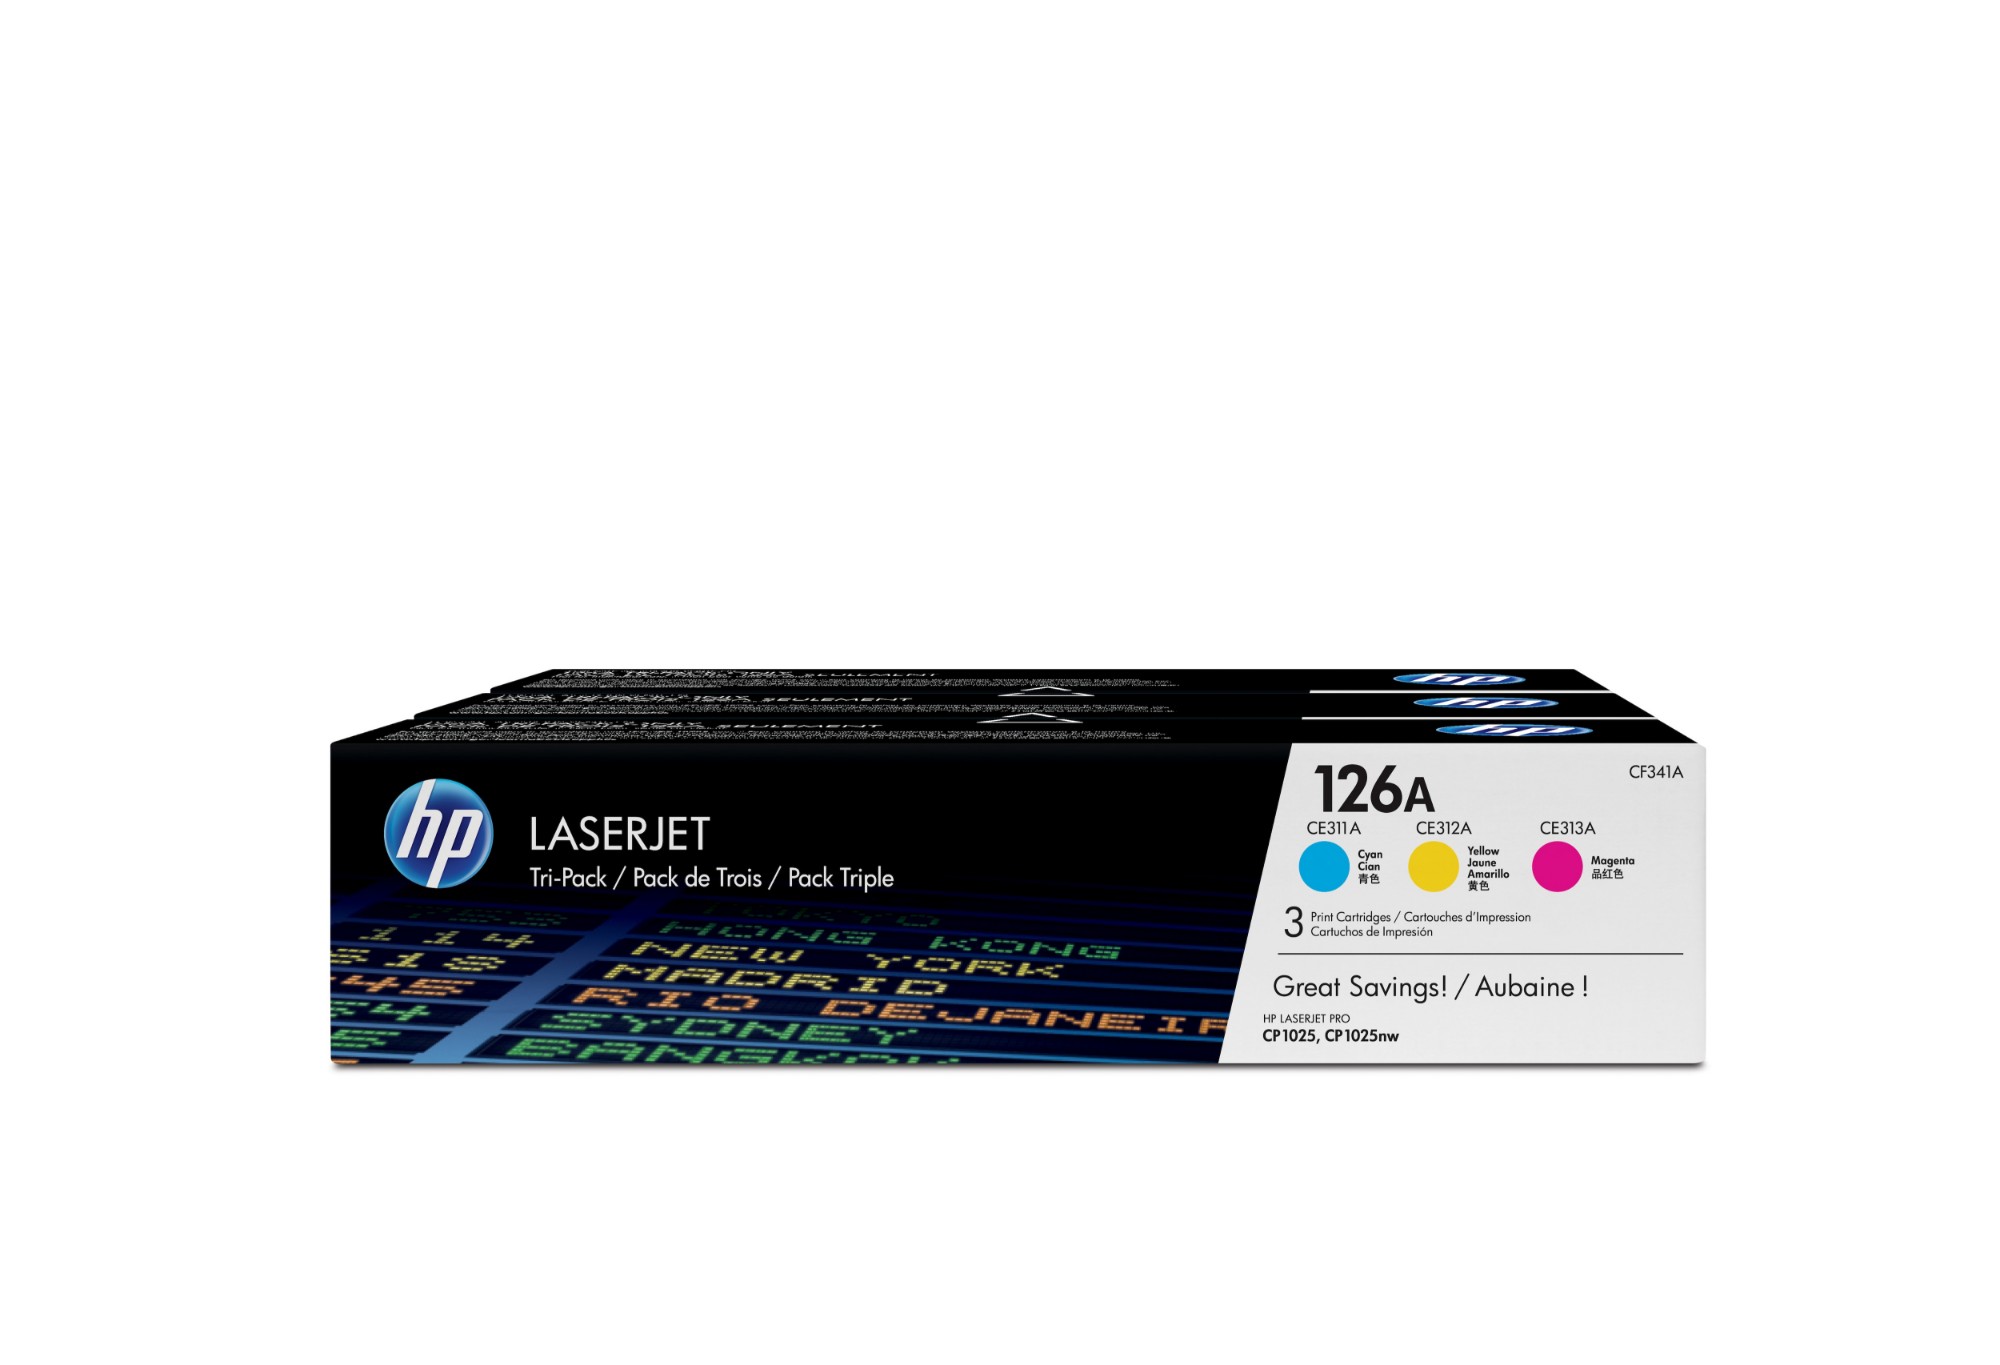 HP CF341A/126A Toner Rainbow-Kit (c,m,y), 3x1K pages ISO/IEC 19798 Pack=3 for HP LJ Pro CP 1025